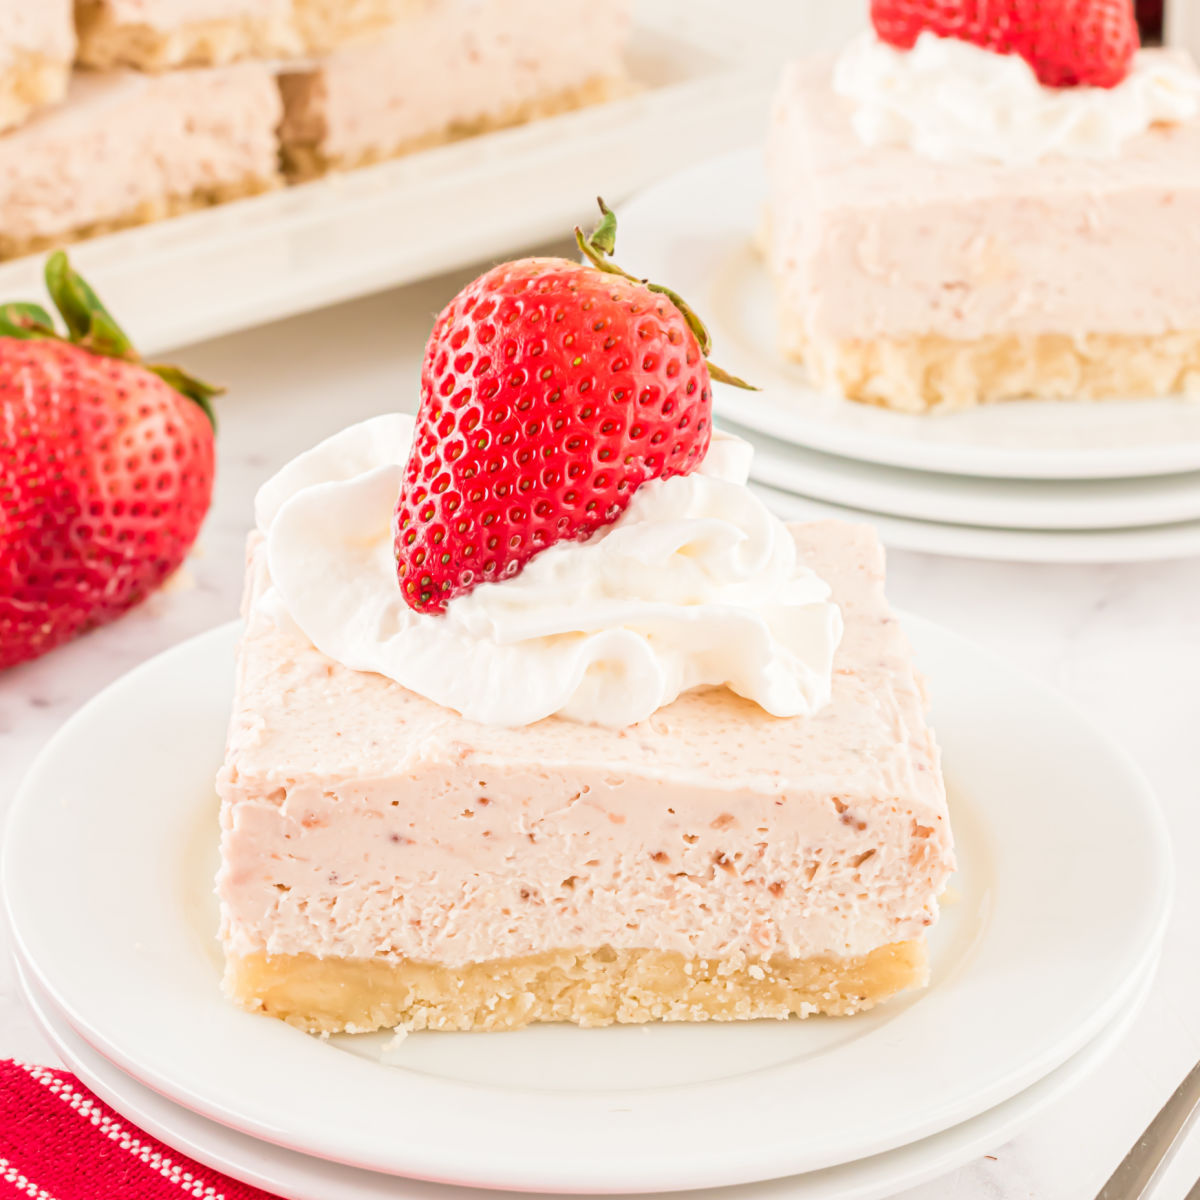 This No Bake Strawberry Cheesecake is an answer to prayer. A creamy cheesecake filling is packed with sweet strawberry flavor on top of a homemade gluten free crust. Made without added sugar, it just might be the perfect cheesecake recipe!